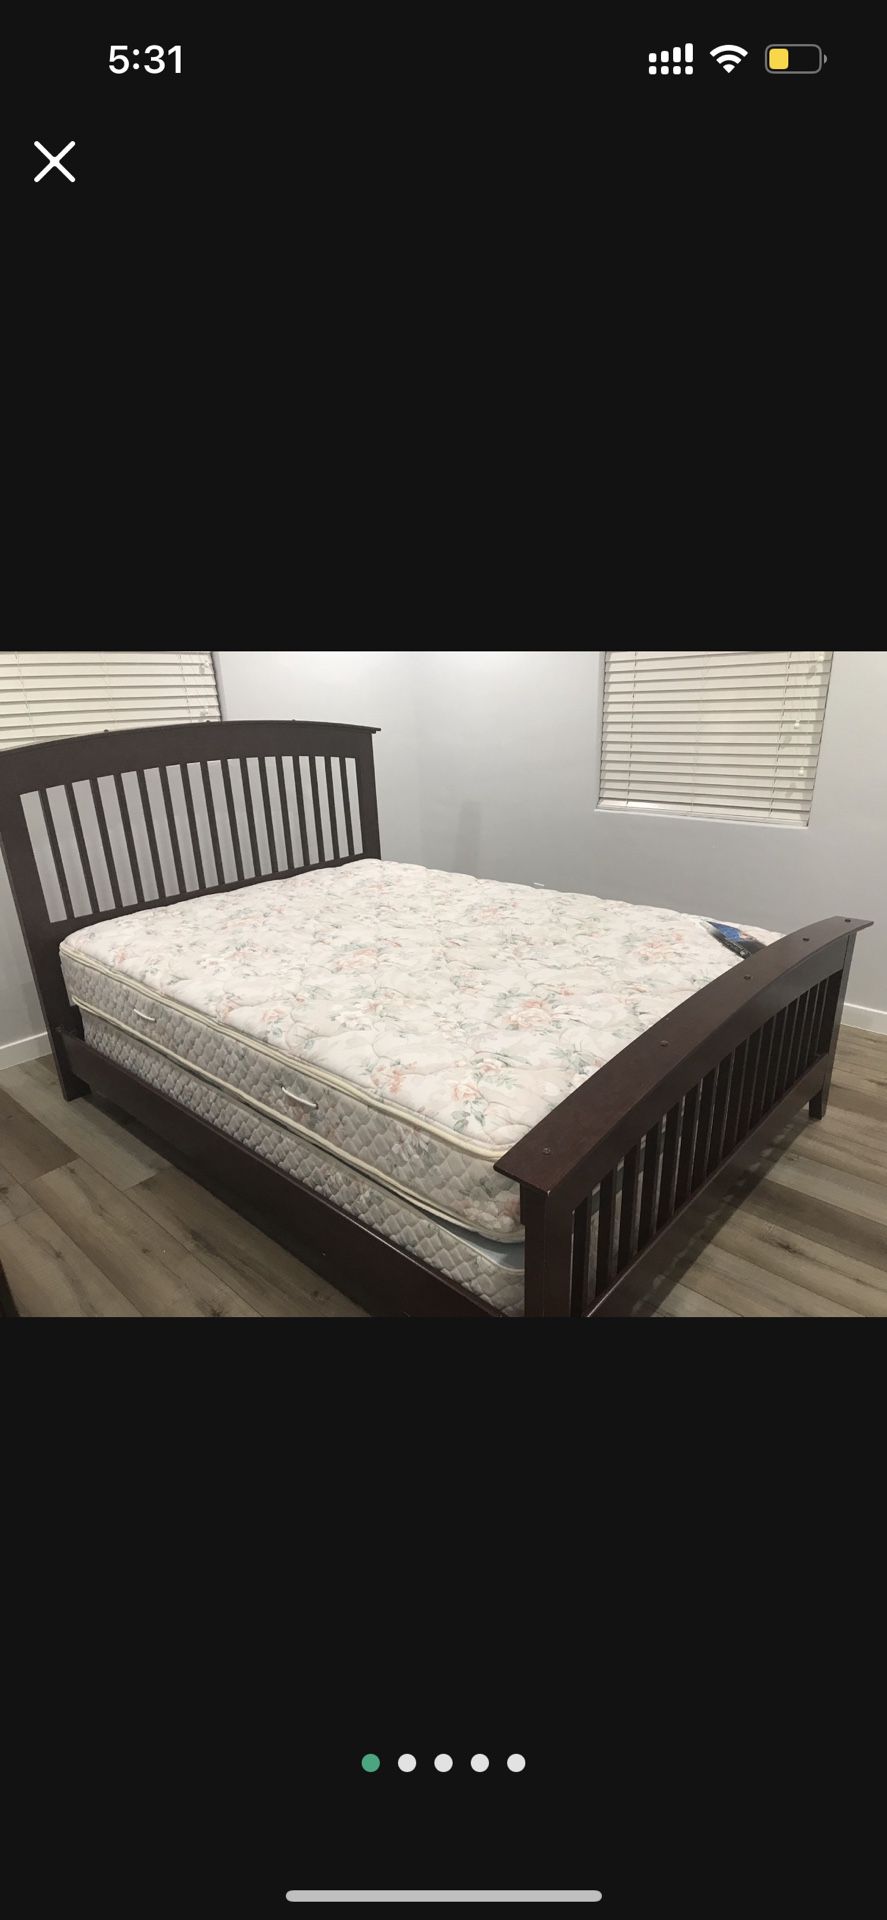 Queen Bedframe with Mattress and Box spring 